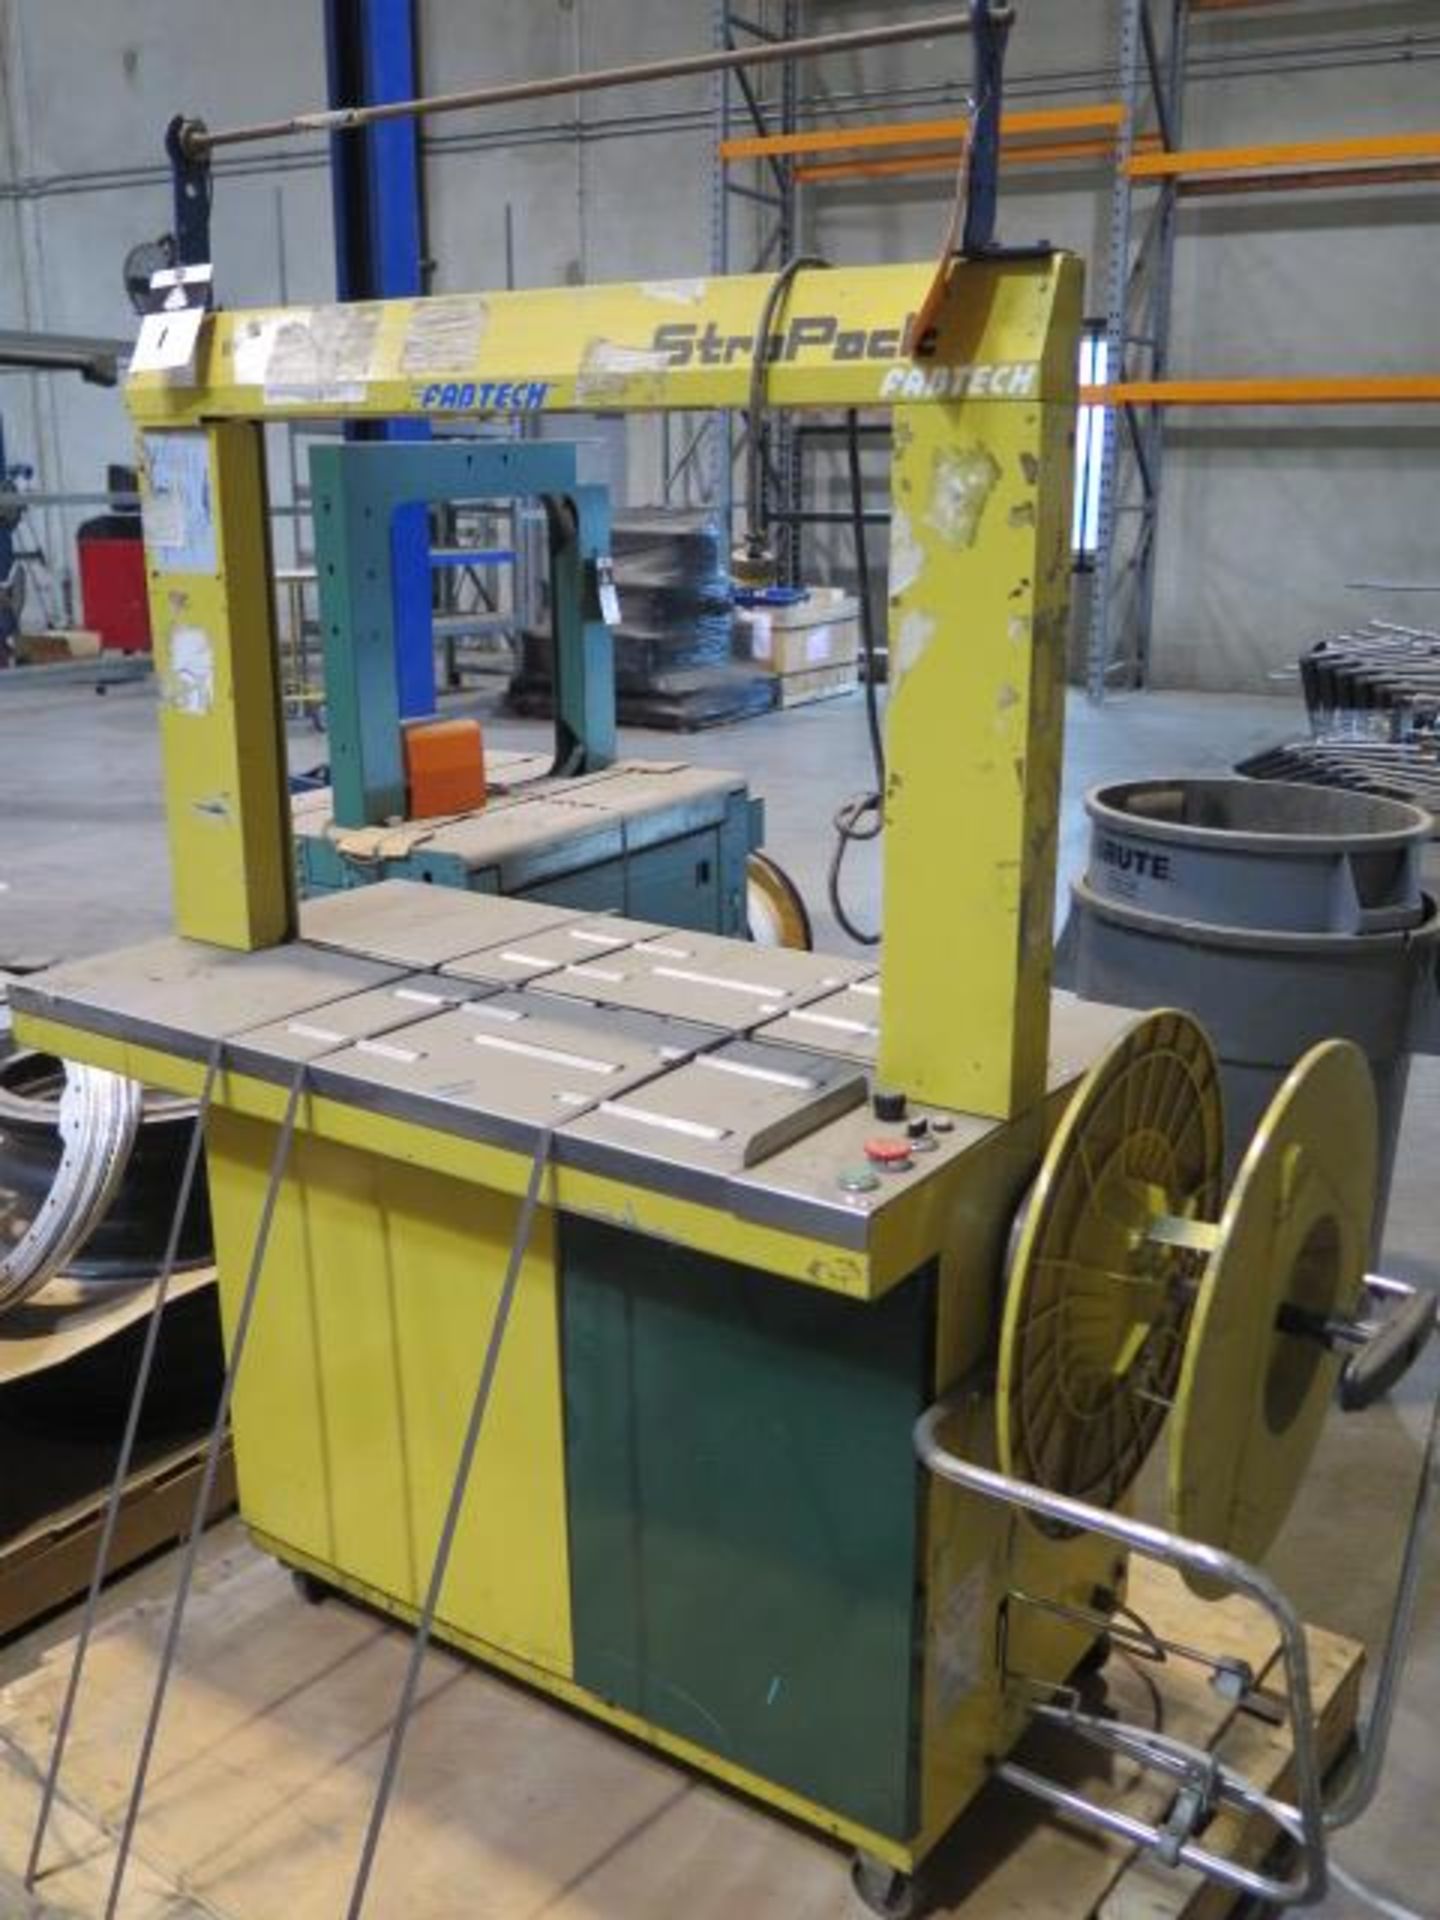 2005 StraPack RQ-8 Automatic Carton Strapping Machine s/n 27218205 (SOLD AS-IS - NO WARRANTY) - Image 2 of 9